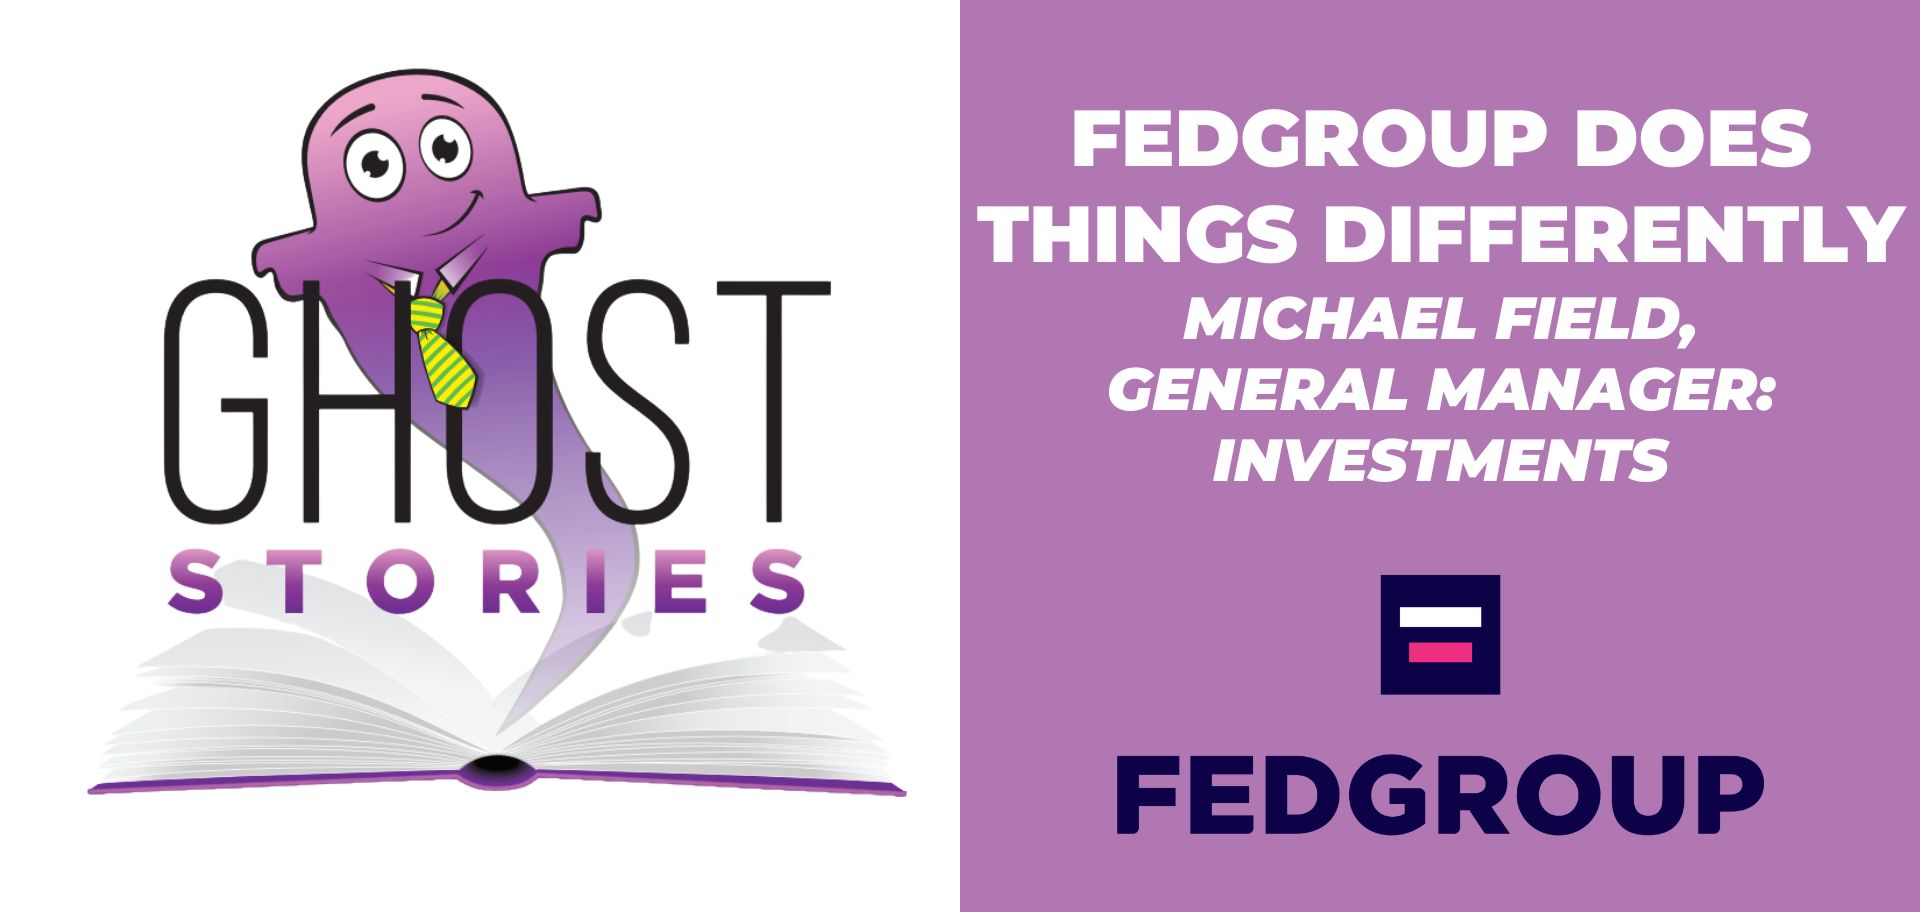 Ghost Stories #40: Fedgroup does things differently